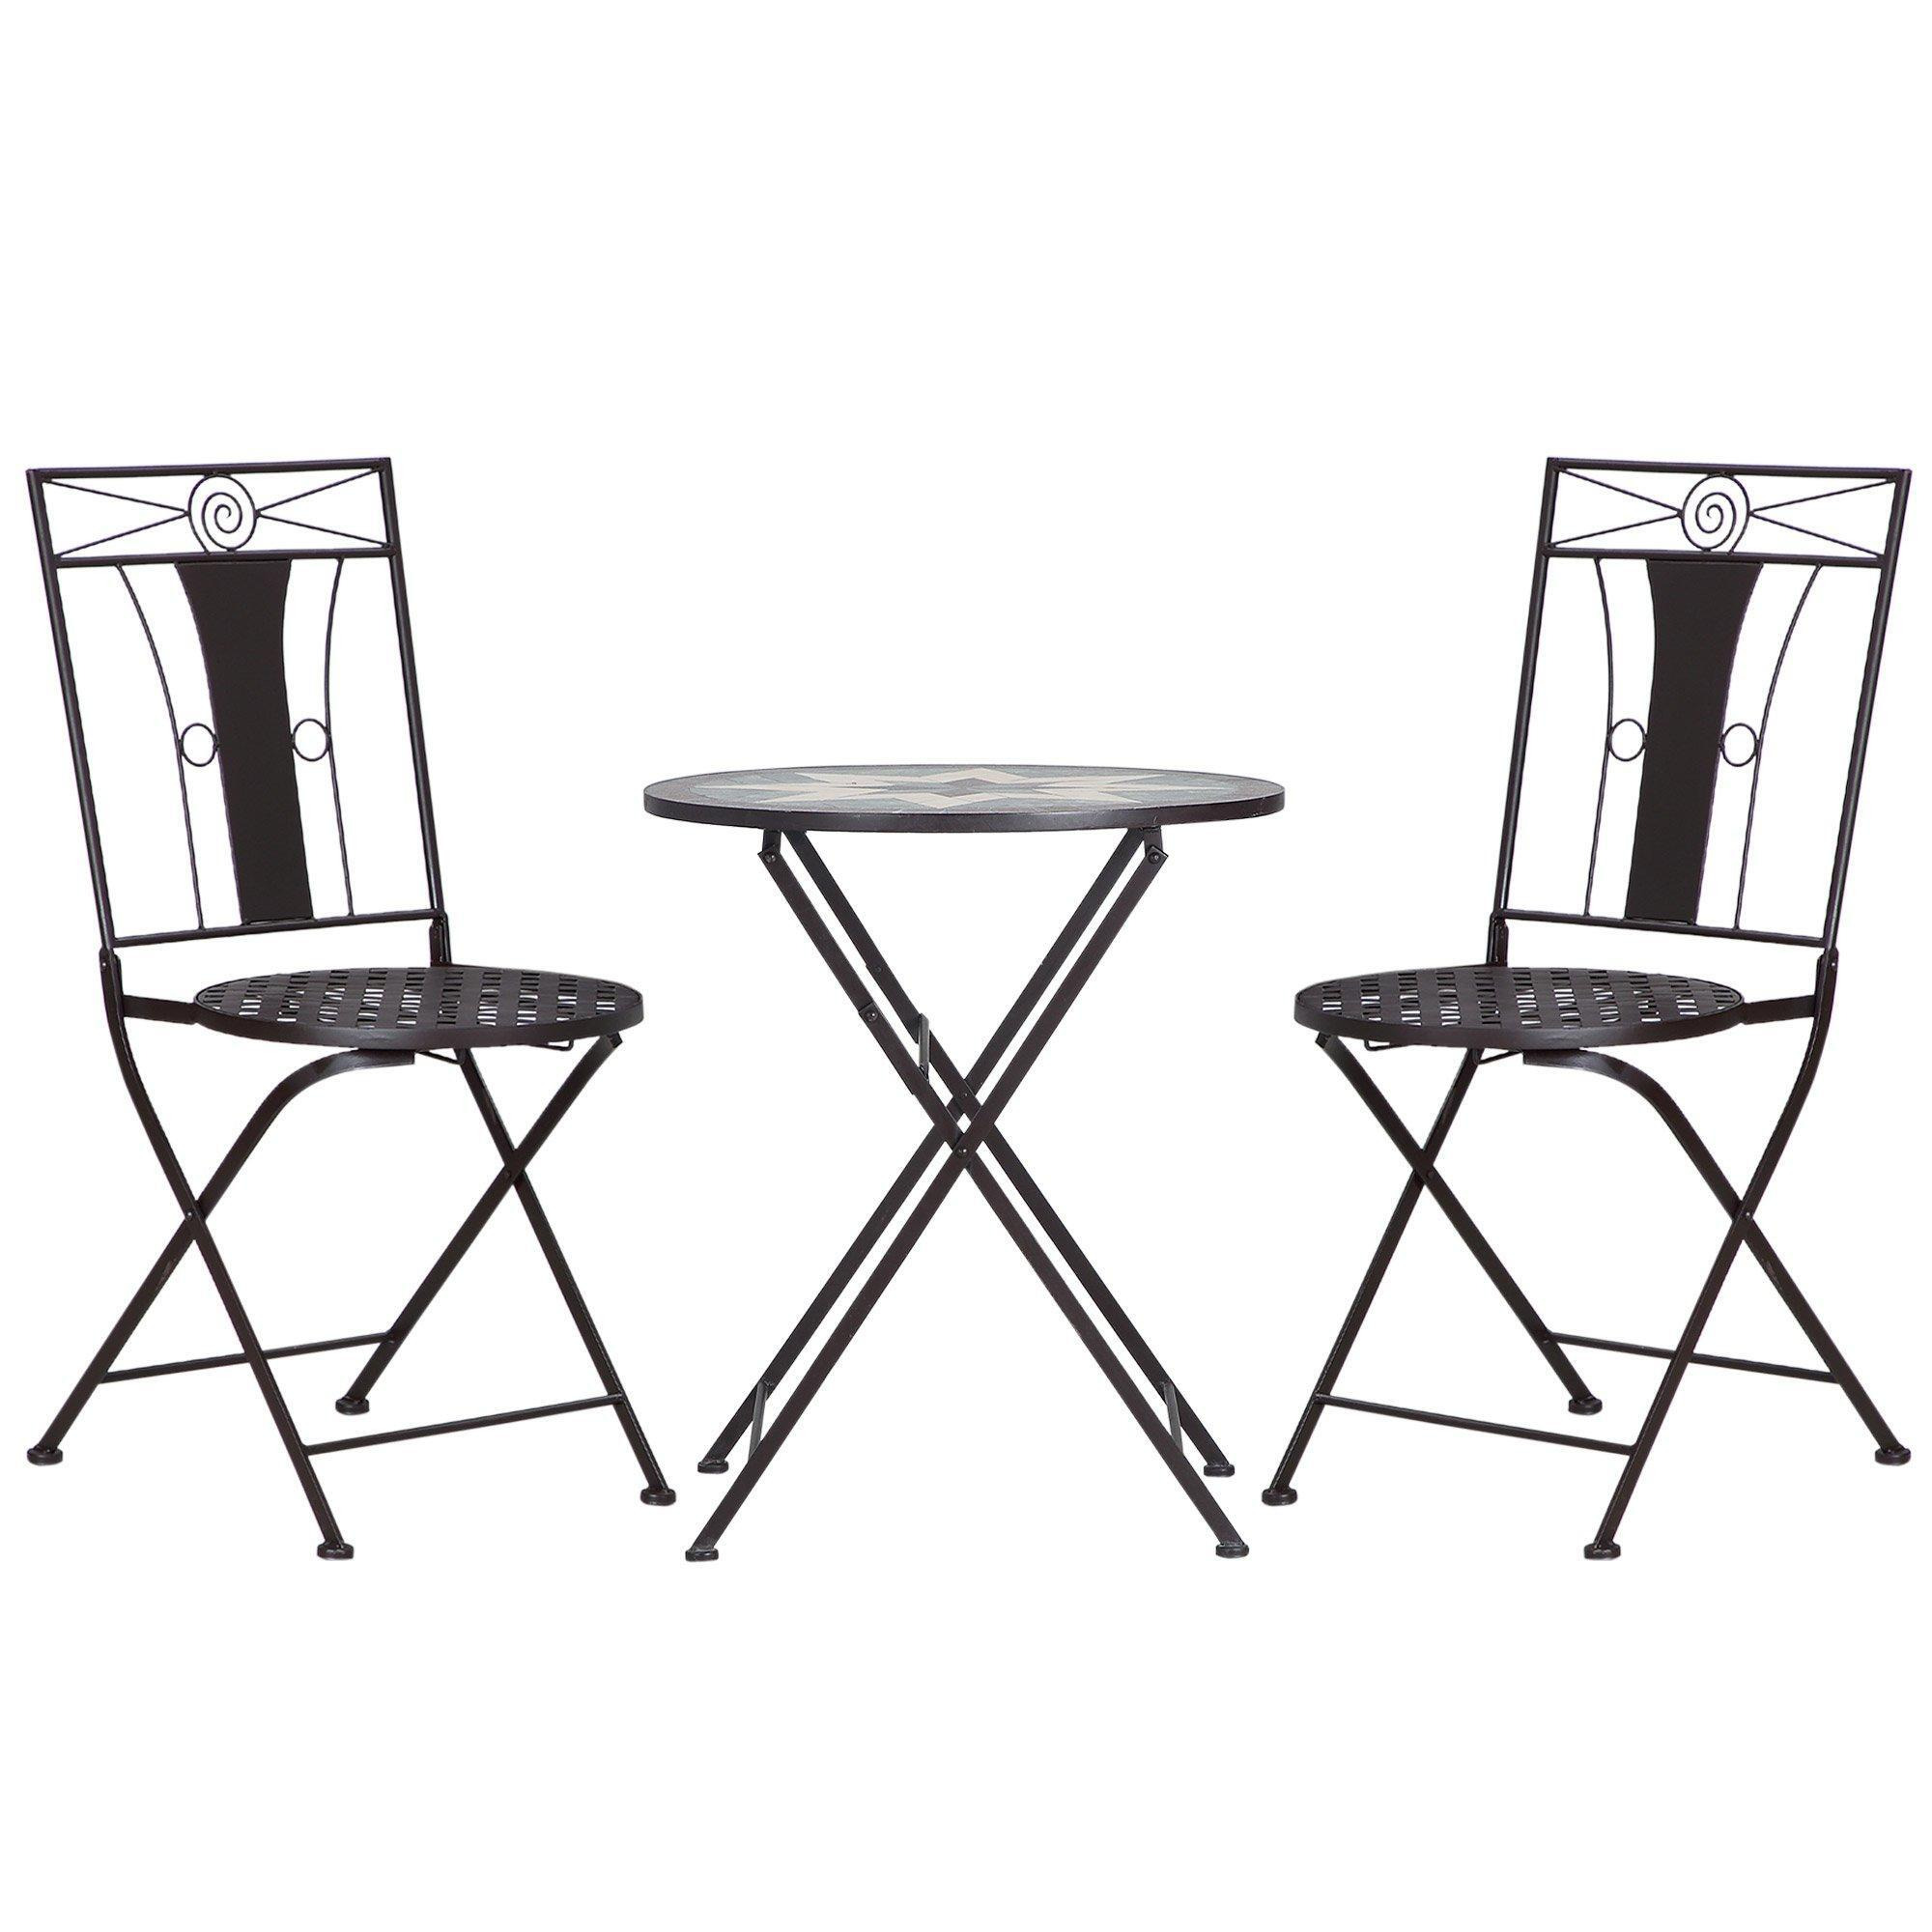 3-Piece Patio Bistro Set with Mosaic Round Table and 2 Armless Chairs - image 1